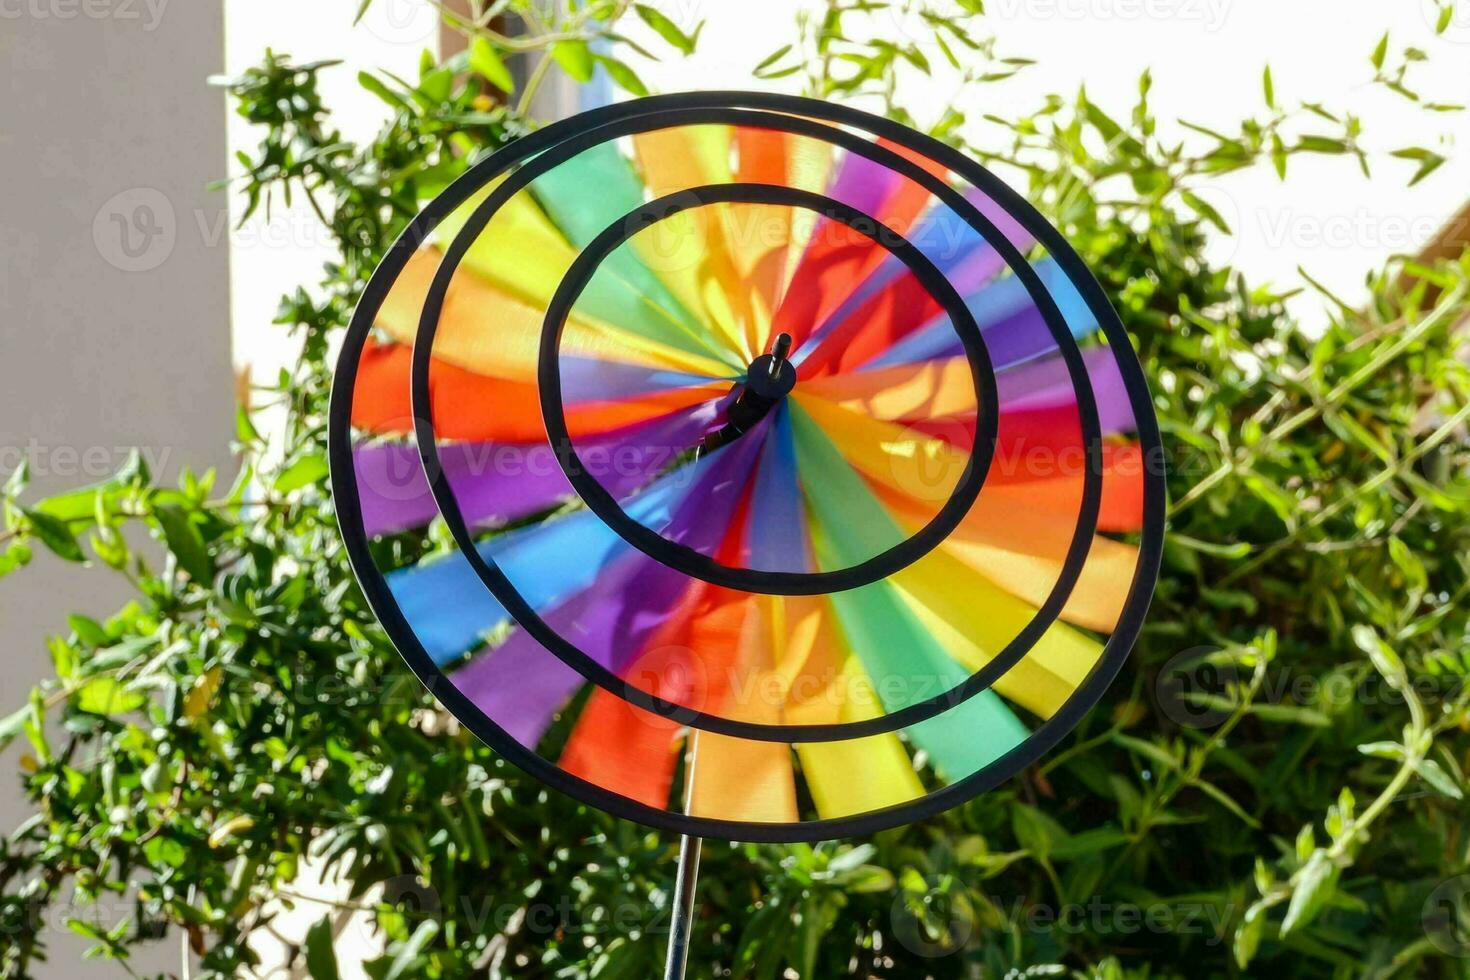 Colorful wind propeller photo